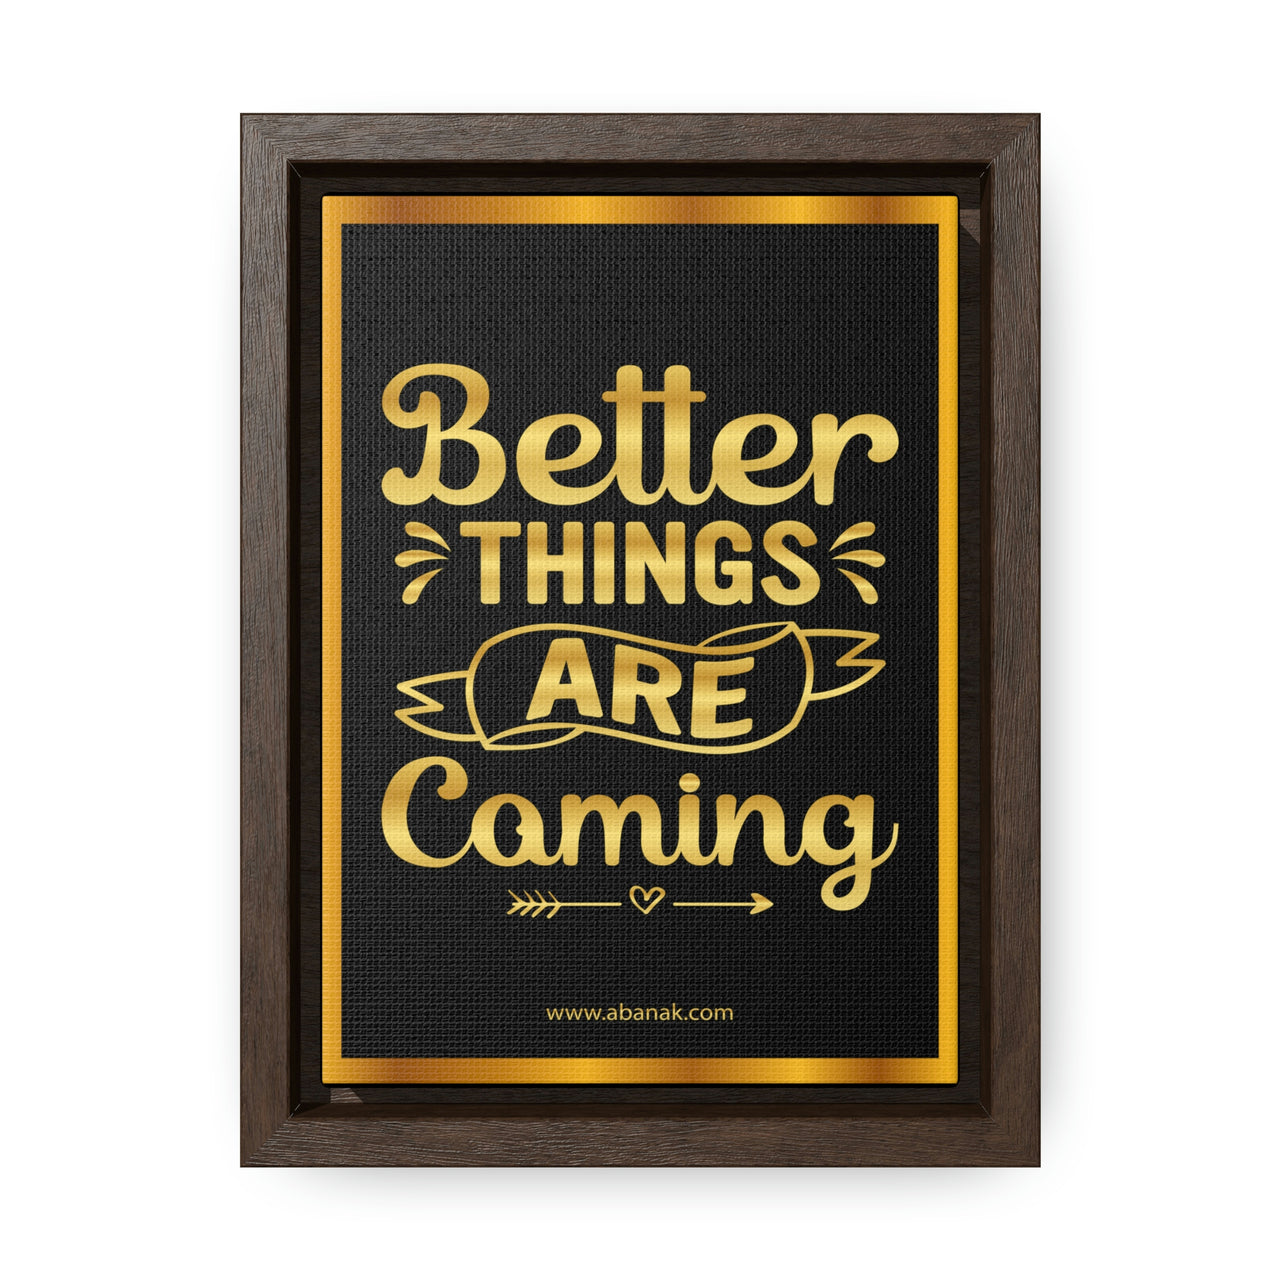 Better Things Are Coming Motivational Framed Canvas Wall Art | Abanak